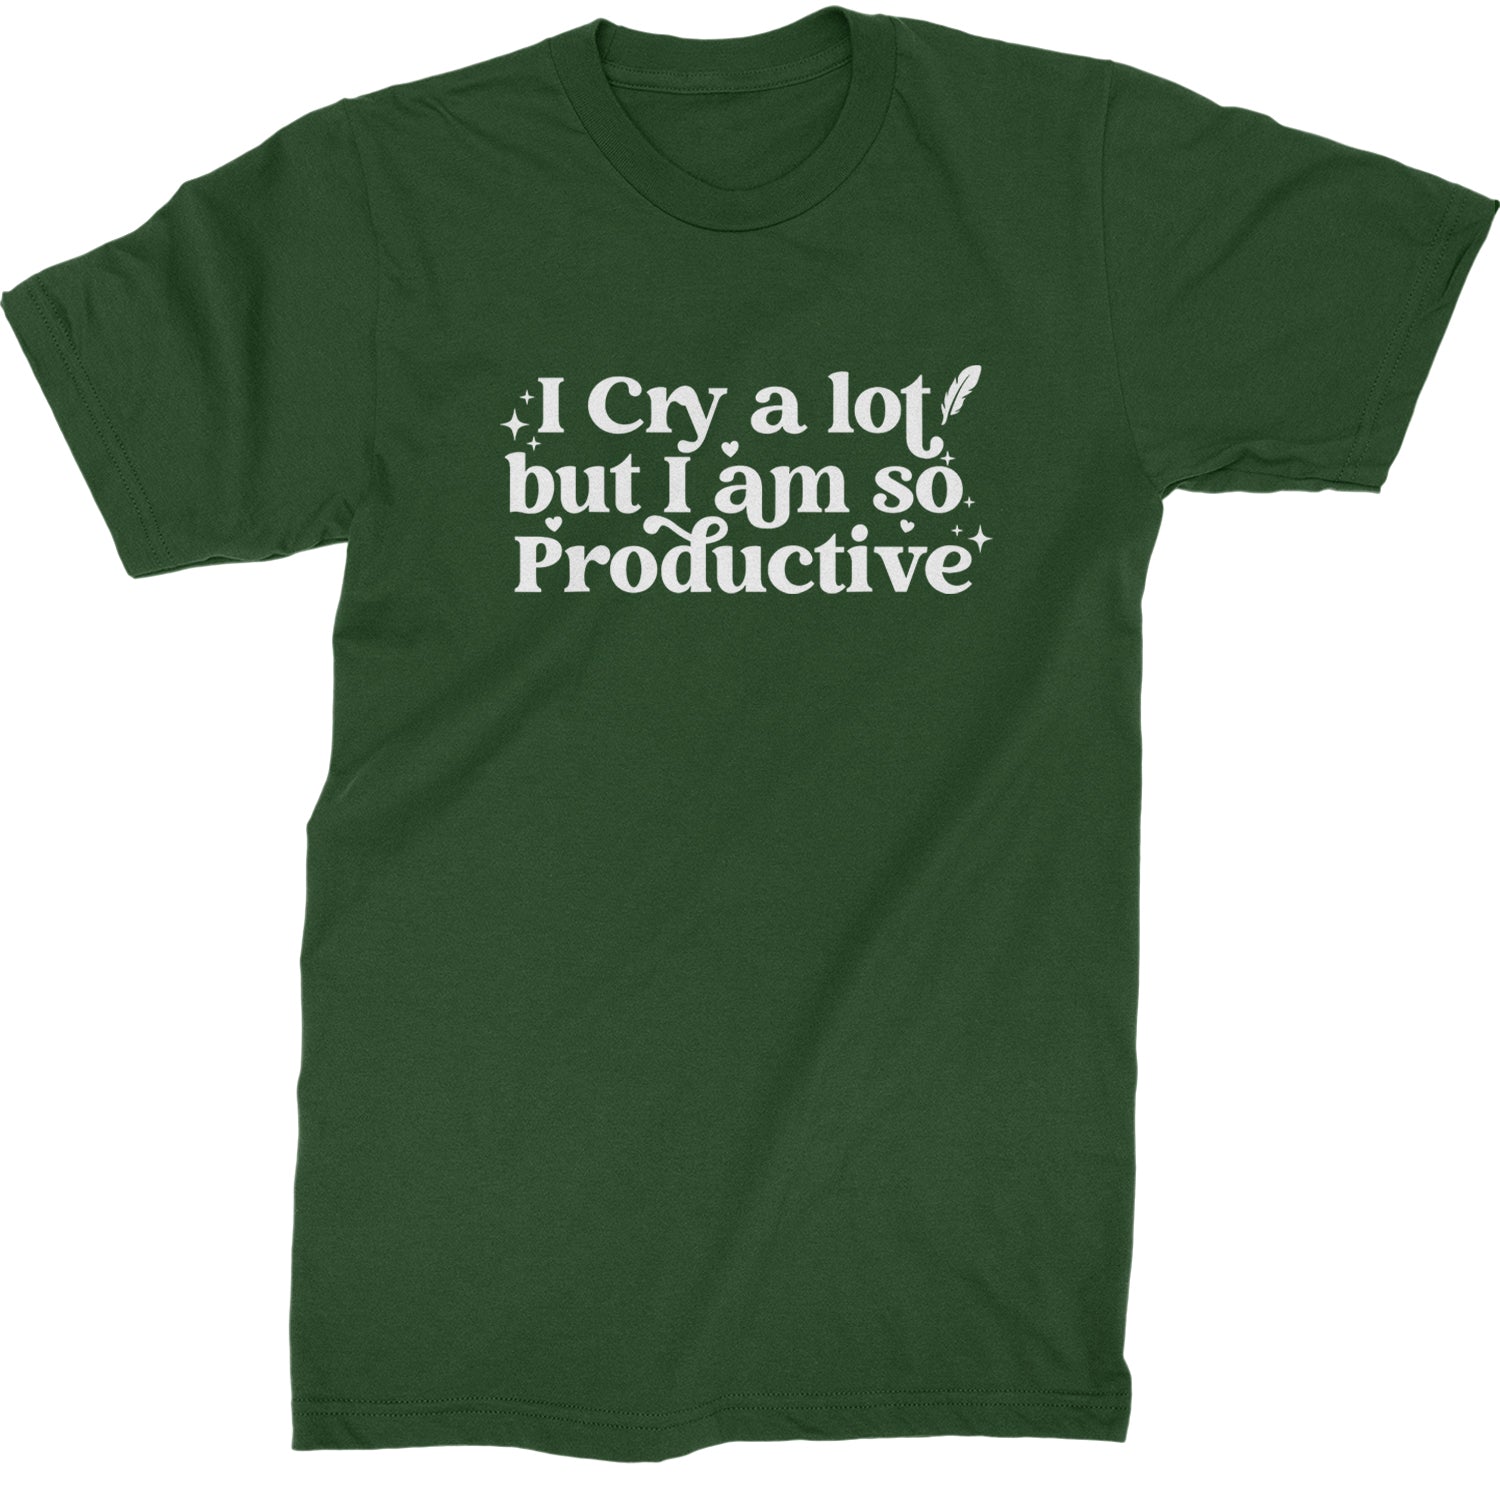 I Cry A Lot But I am So Productive TTPD Mens T-shirt Forest Green